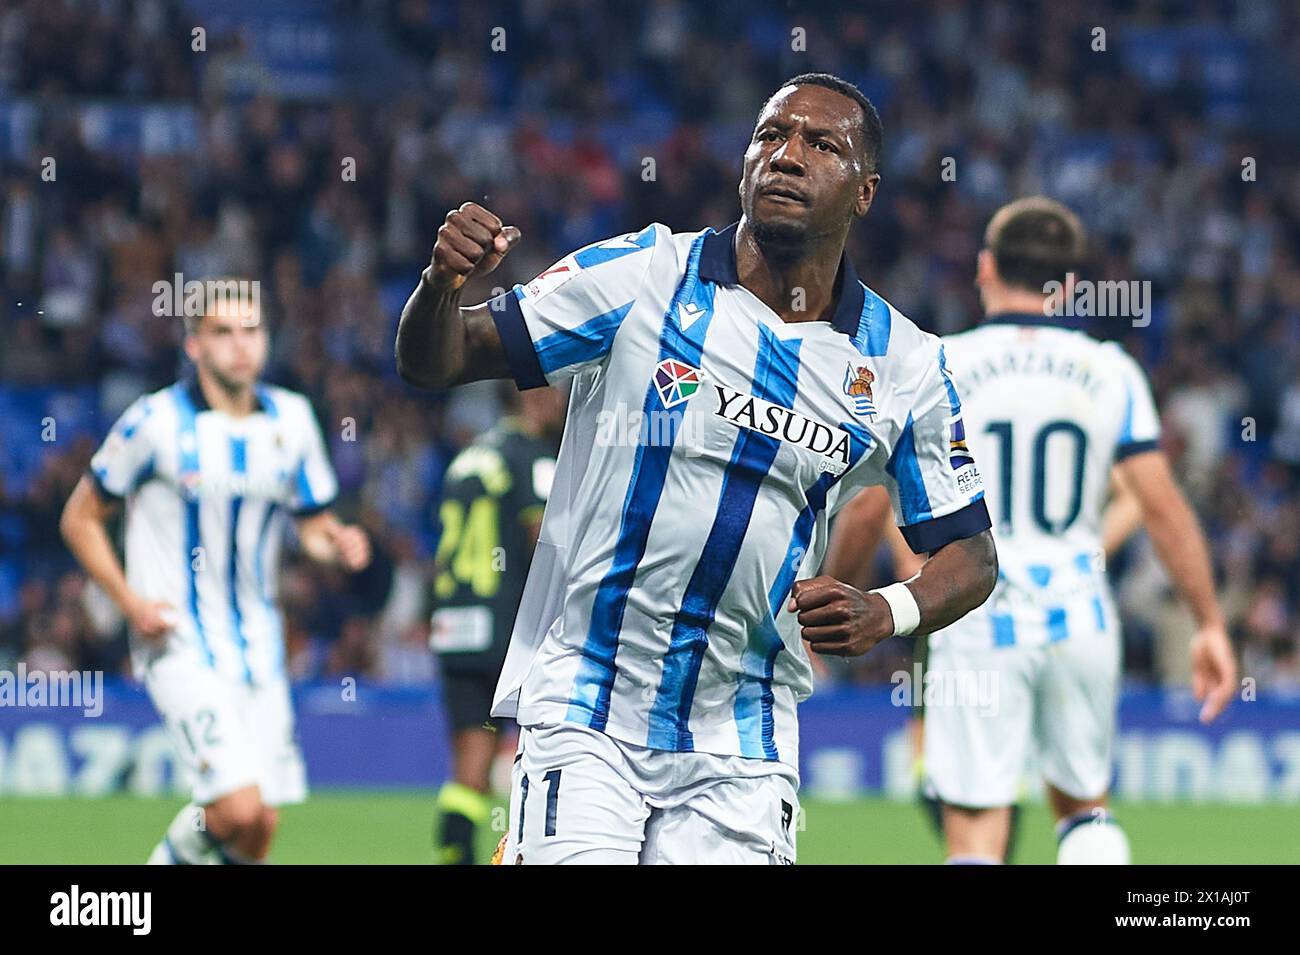 Sheraldo Becker of Real Sociedad celebrates after scoring his team's first goal during the LaLiga EA Sports match between Real Sociedad and UD Almeria Stock Photo